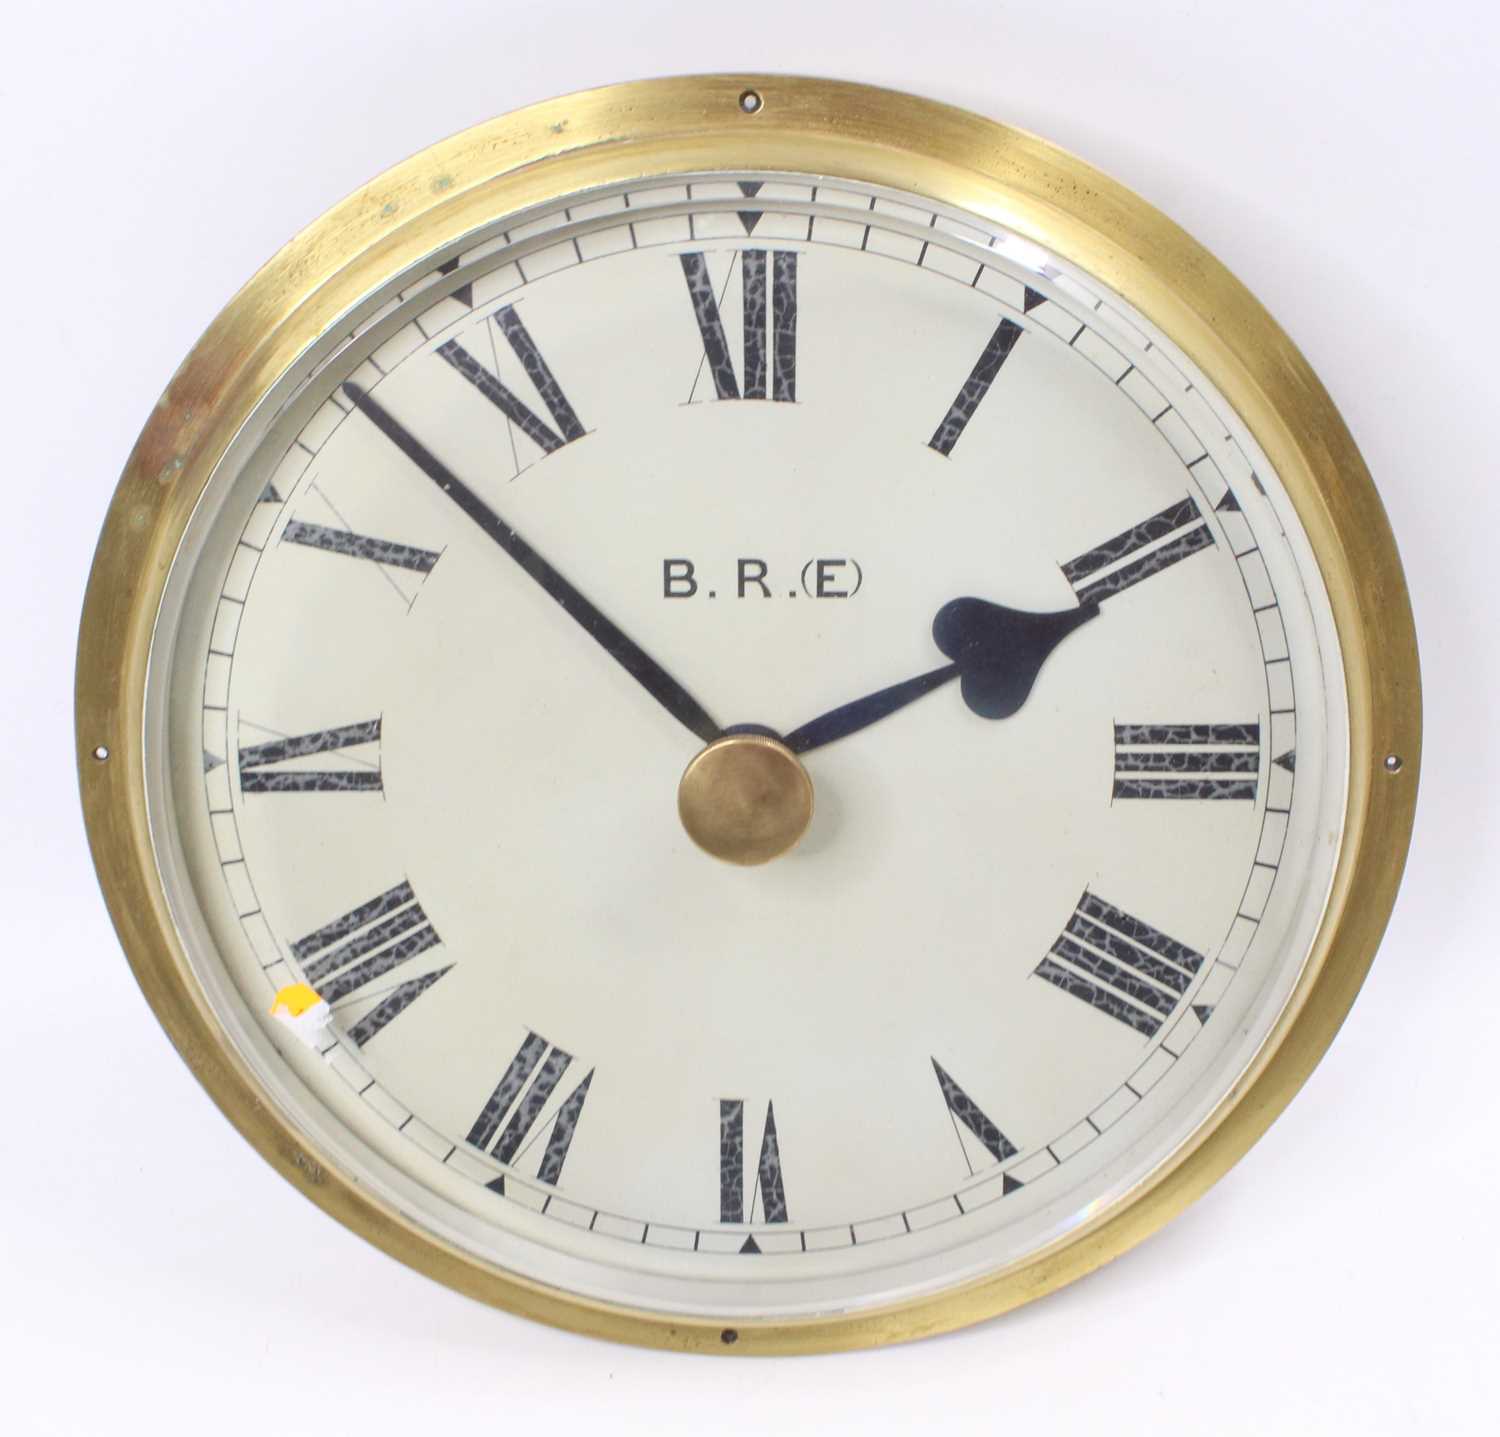 BR (E) stamped clock dial, comprising white dial with Roman numerals, un-powered example, appears to